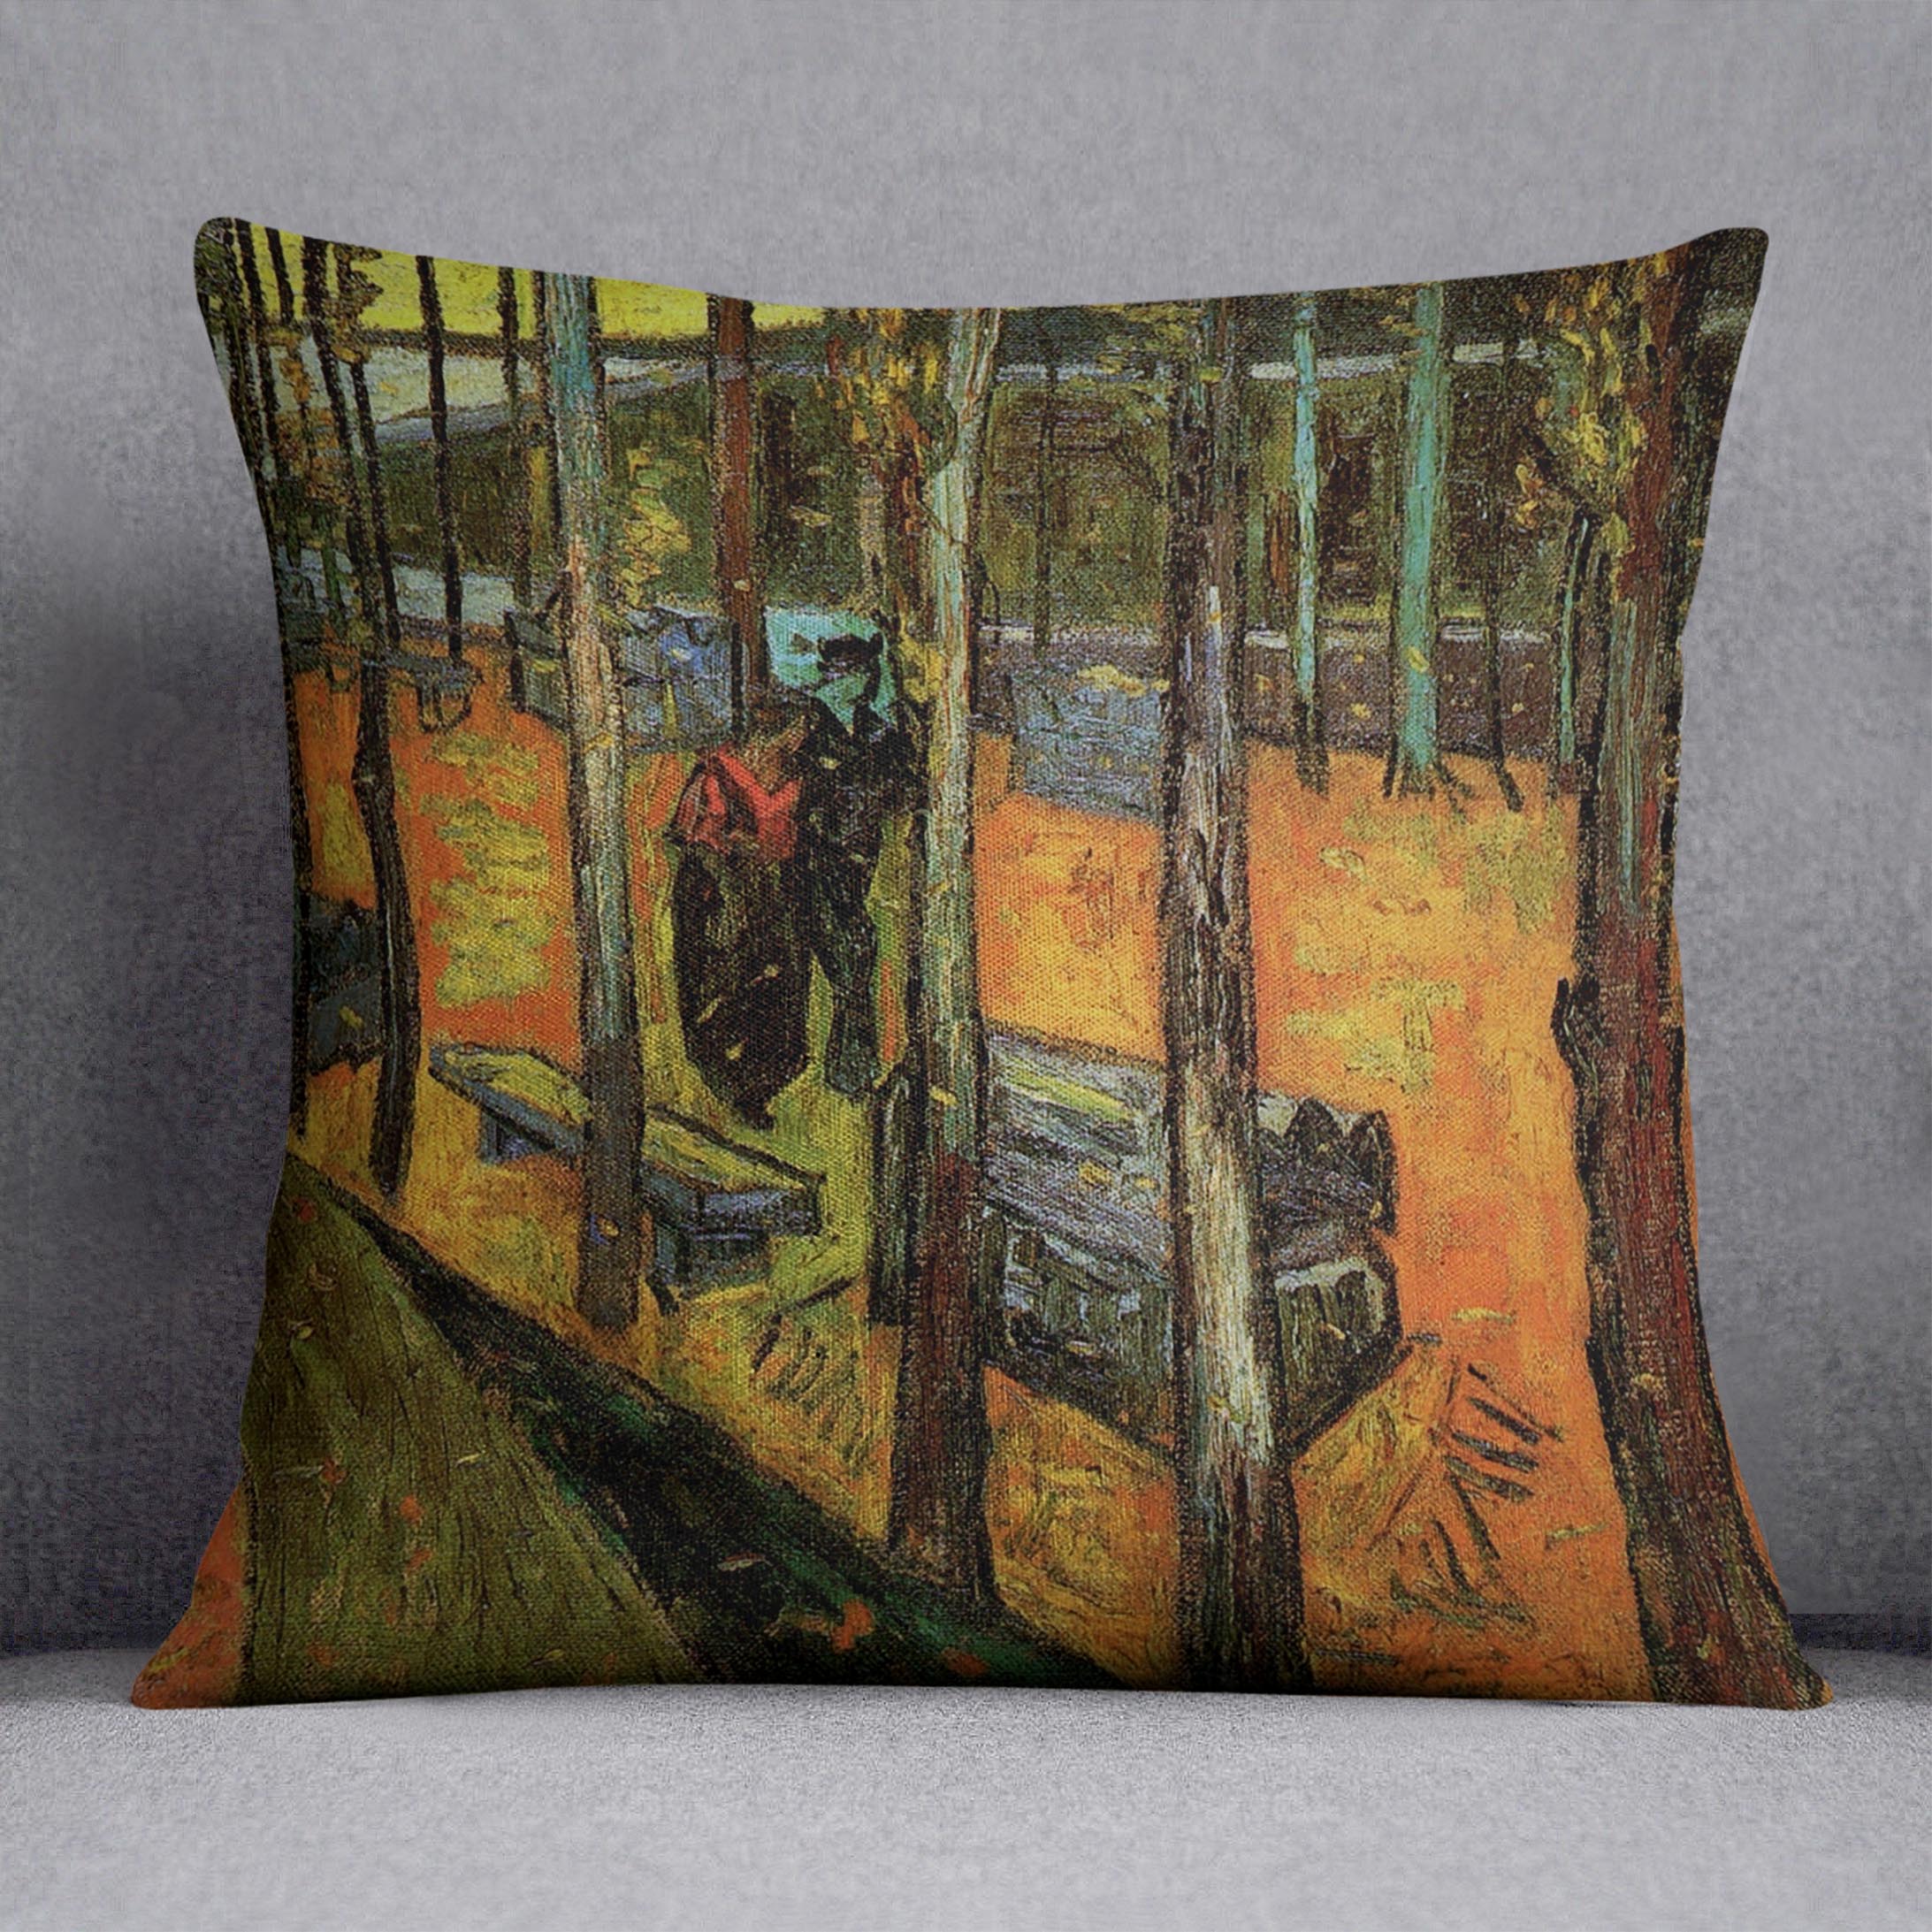 Les Alyscamps 2 by Van Gogh Cushion